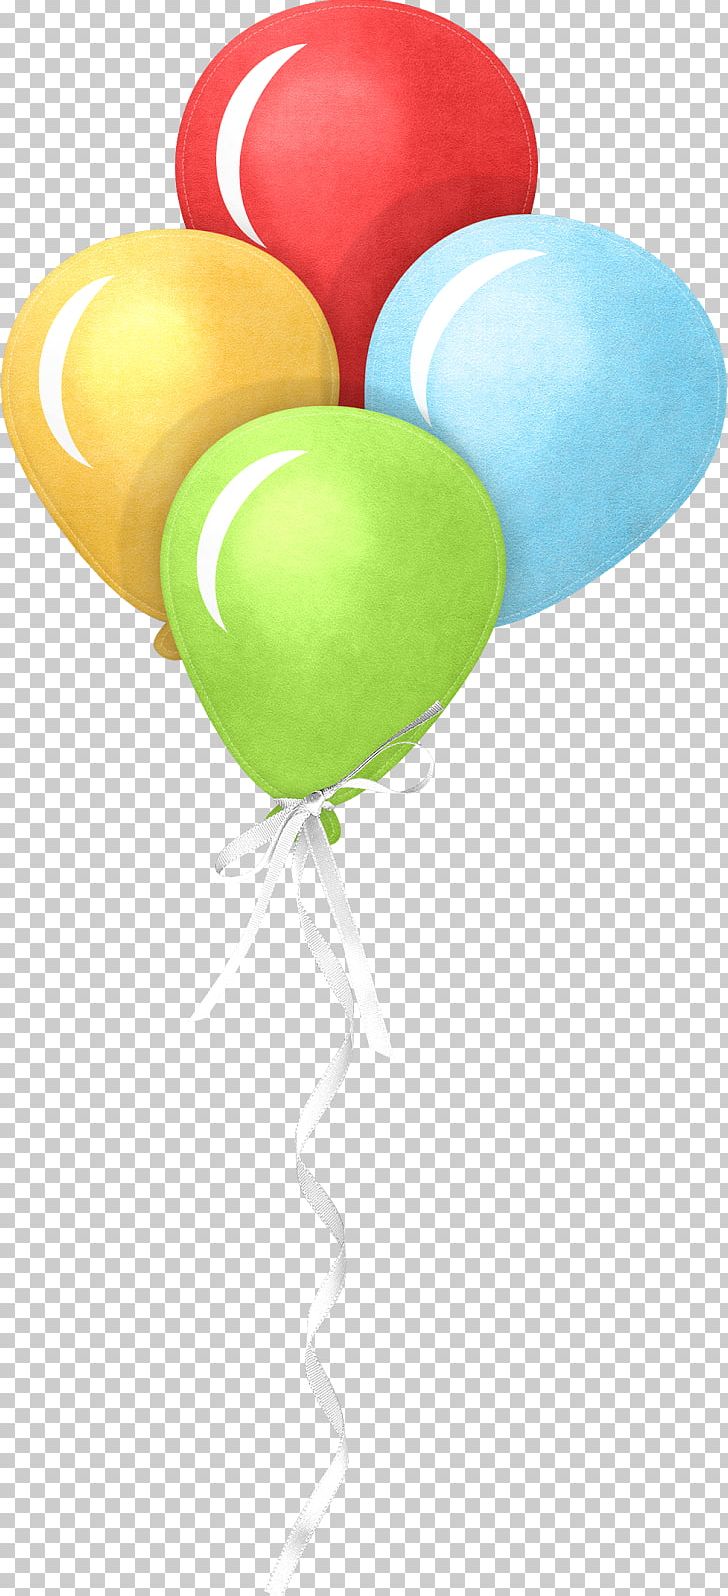 Balloon Birthday Party Circus PNG, Clipart, Balloon, Balloons, Birthday, Birthday Party, Carnival Free PNG Download